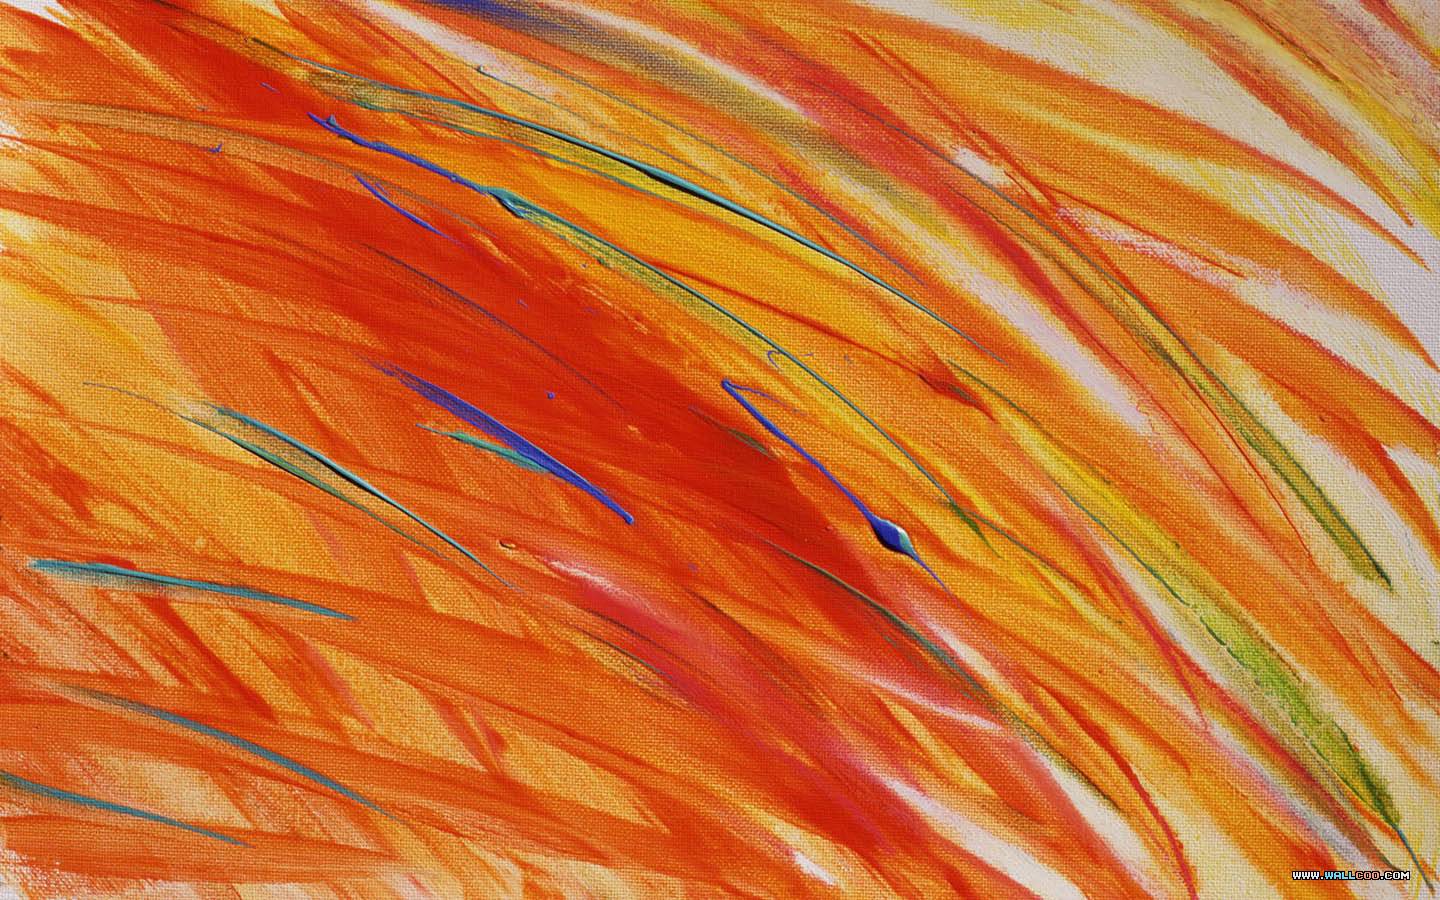 Painted Canvas Texture With Brush Strokes 1440*900 - Painting - HD Wallpaper 